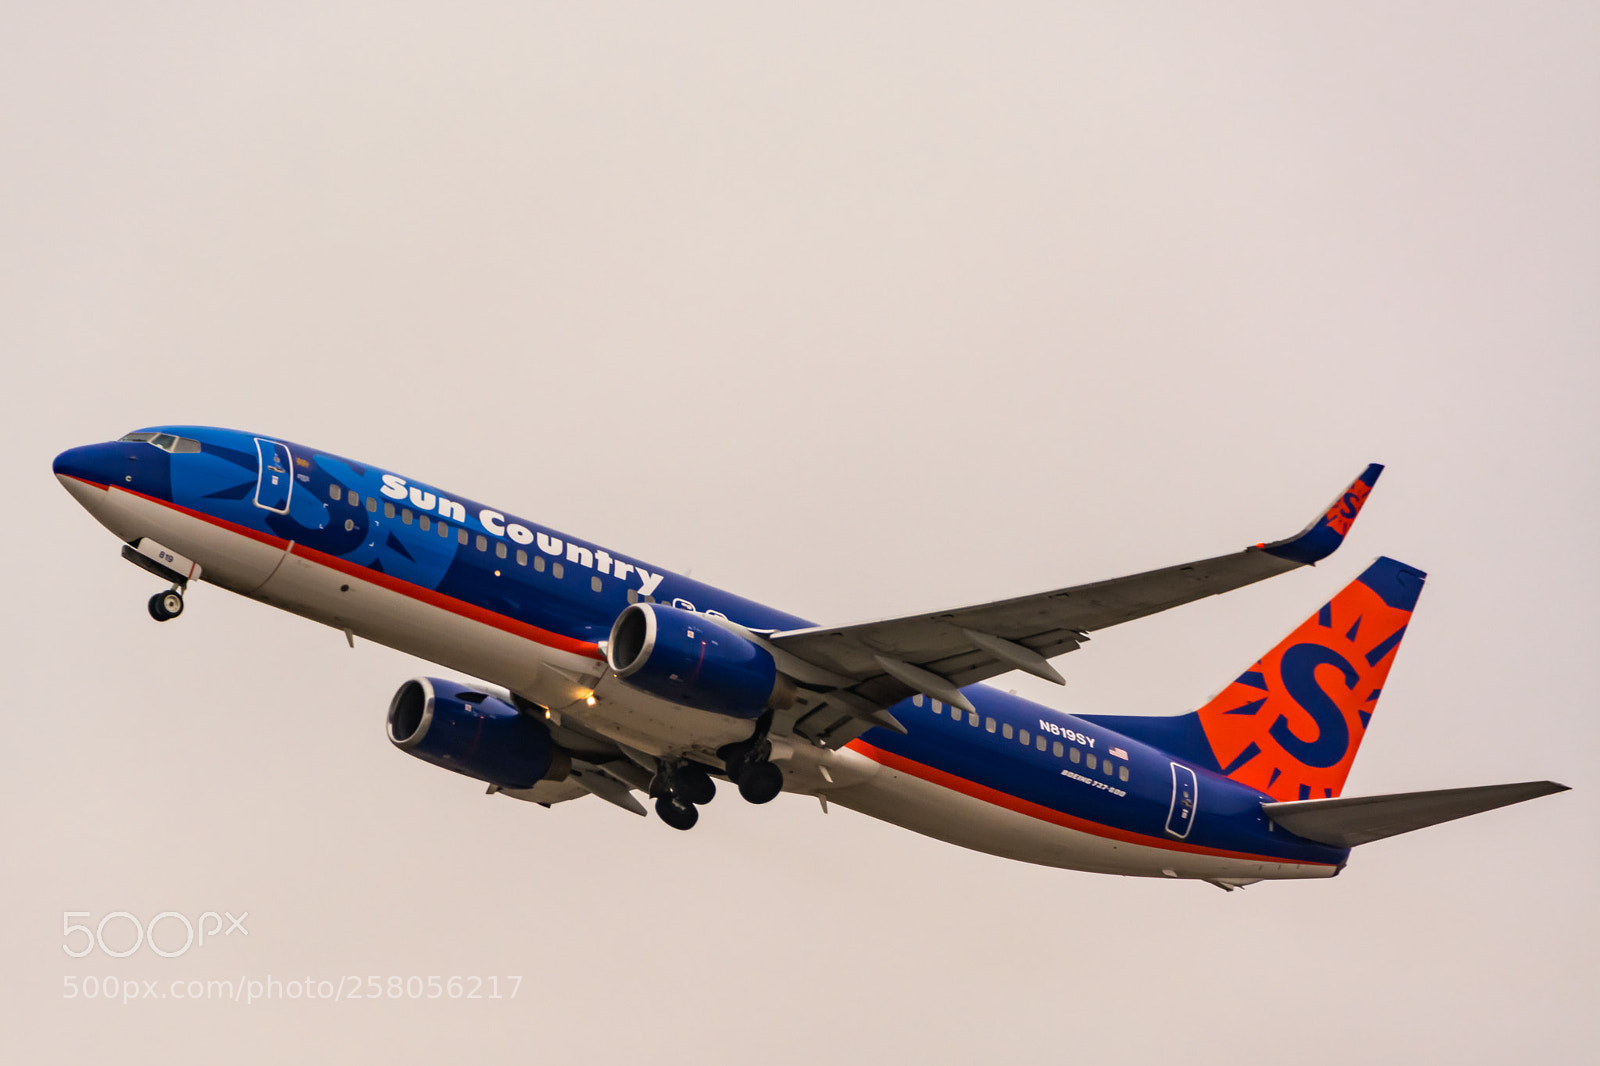 Nikon D7100 sample photo. Sun country airlines boeing photography